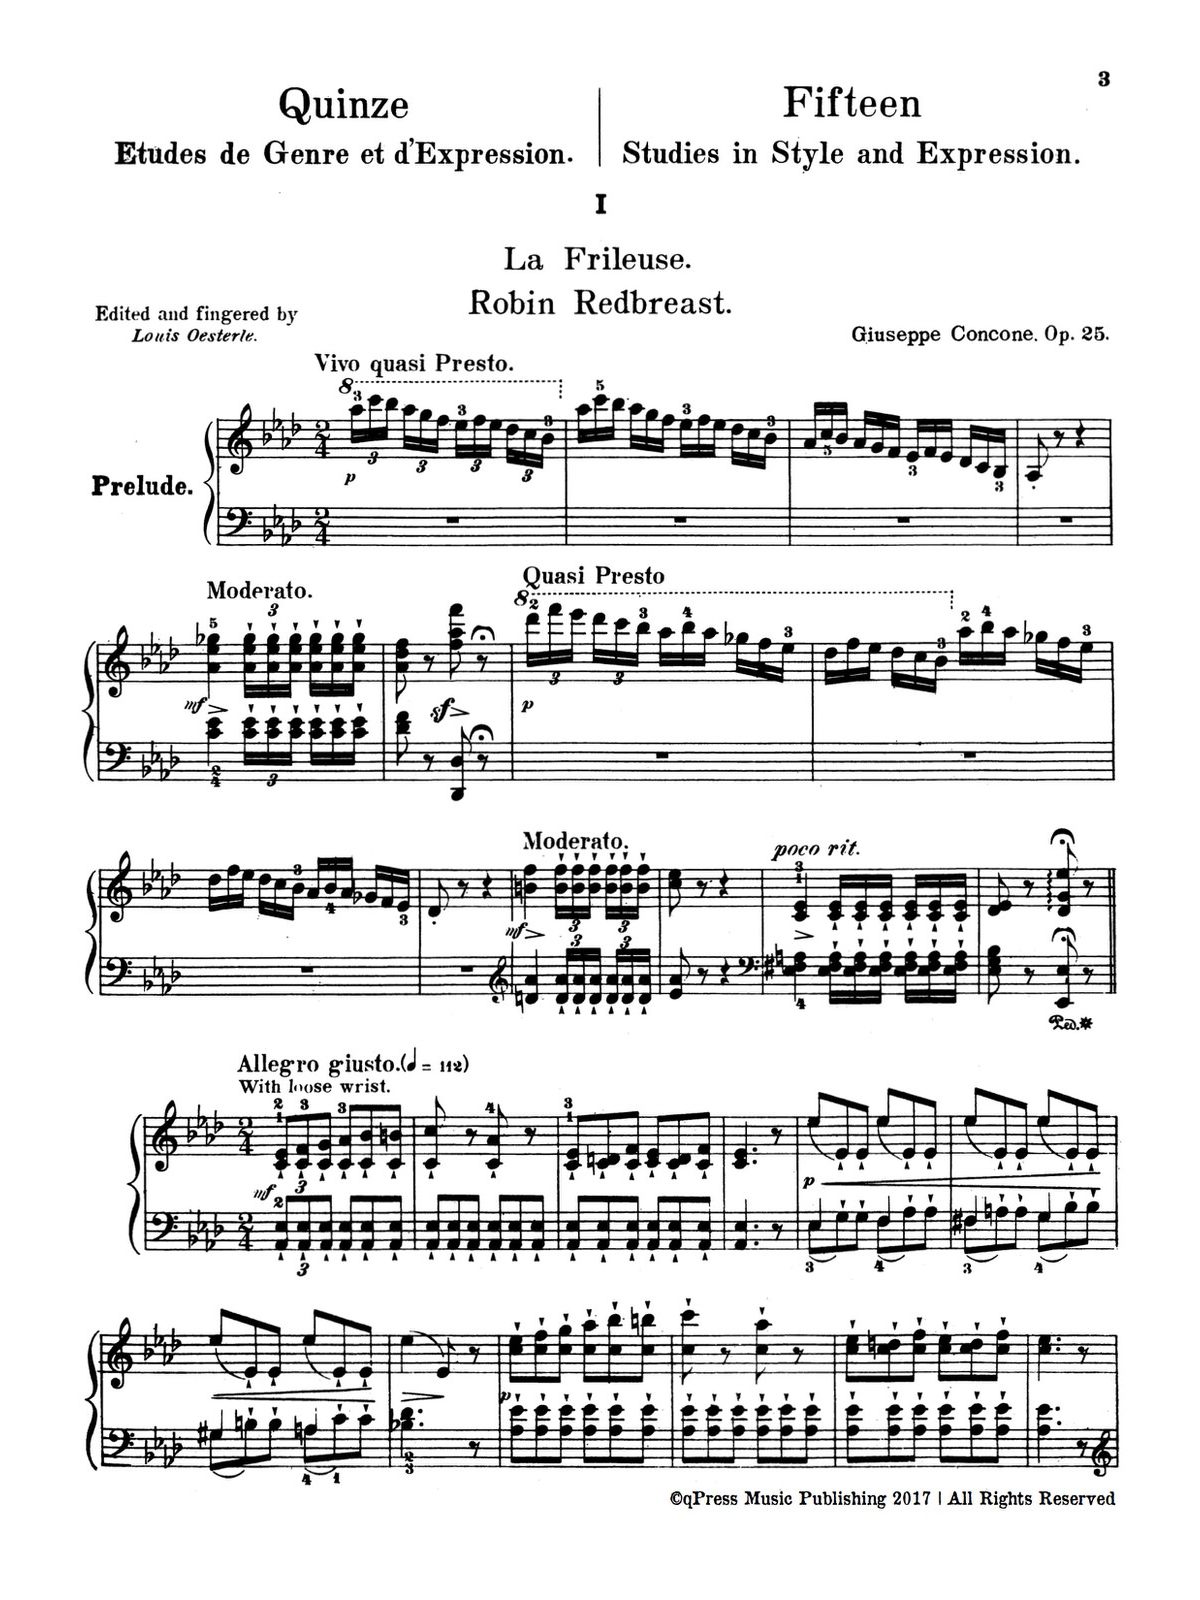 Concone, 15 Studies in Style and Expression, Op.25-p03